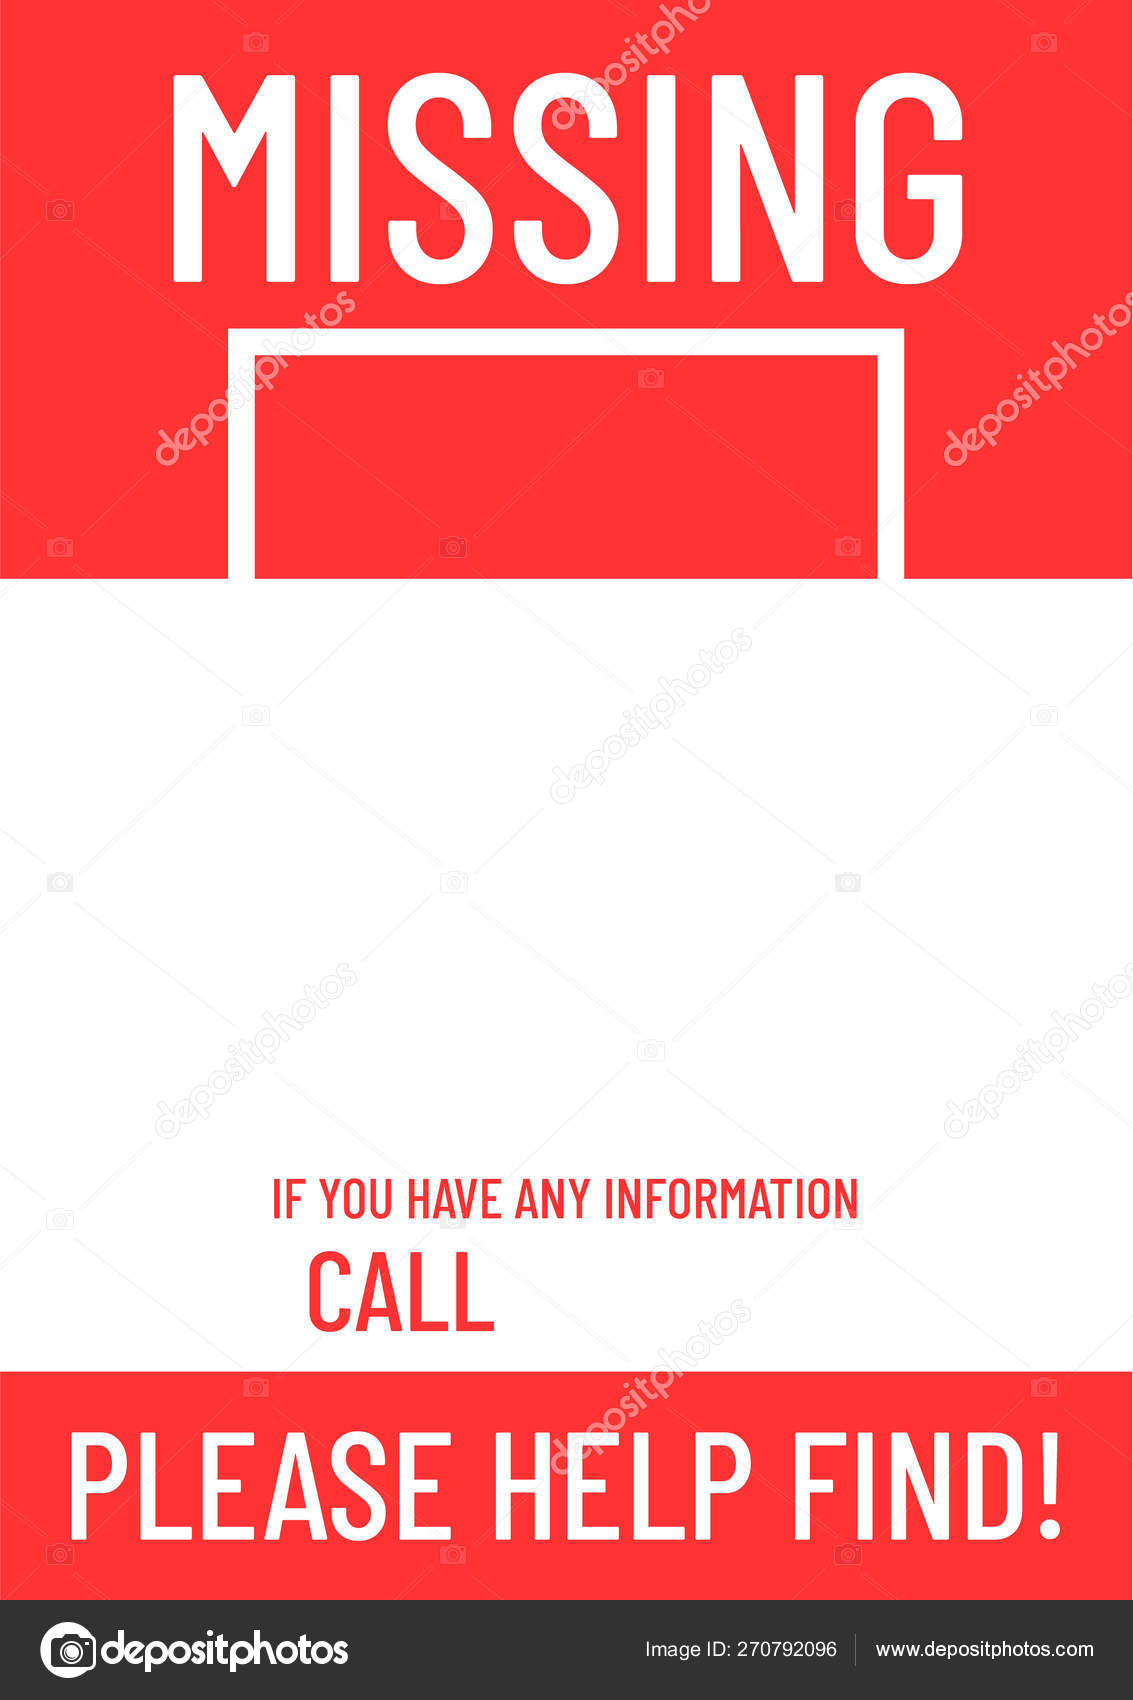 Blank Missing Poster Template Ready To Print Stock Vector Image By arseniuk oleksii 270792096